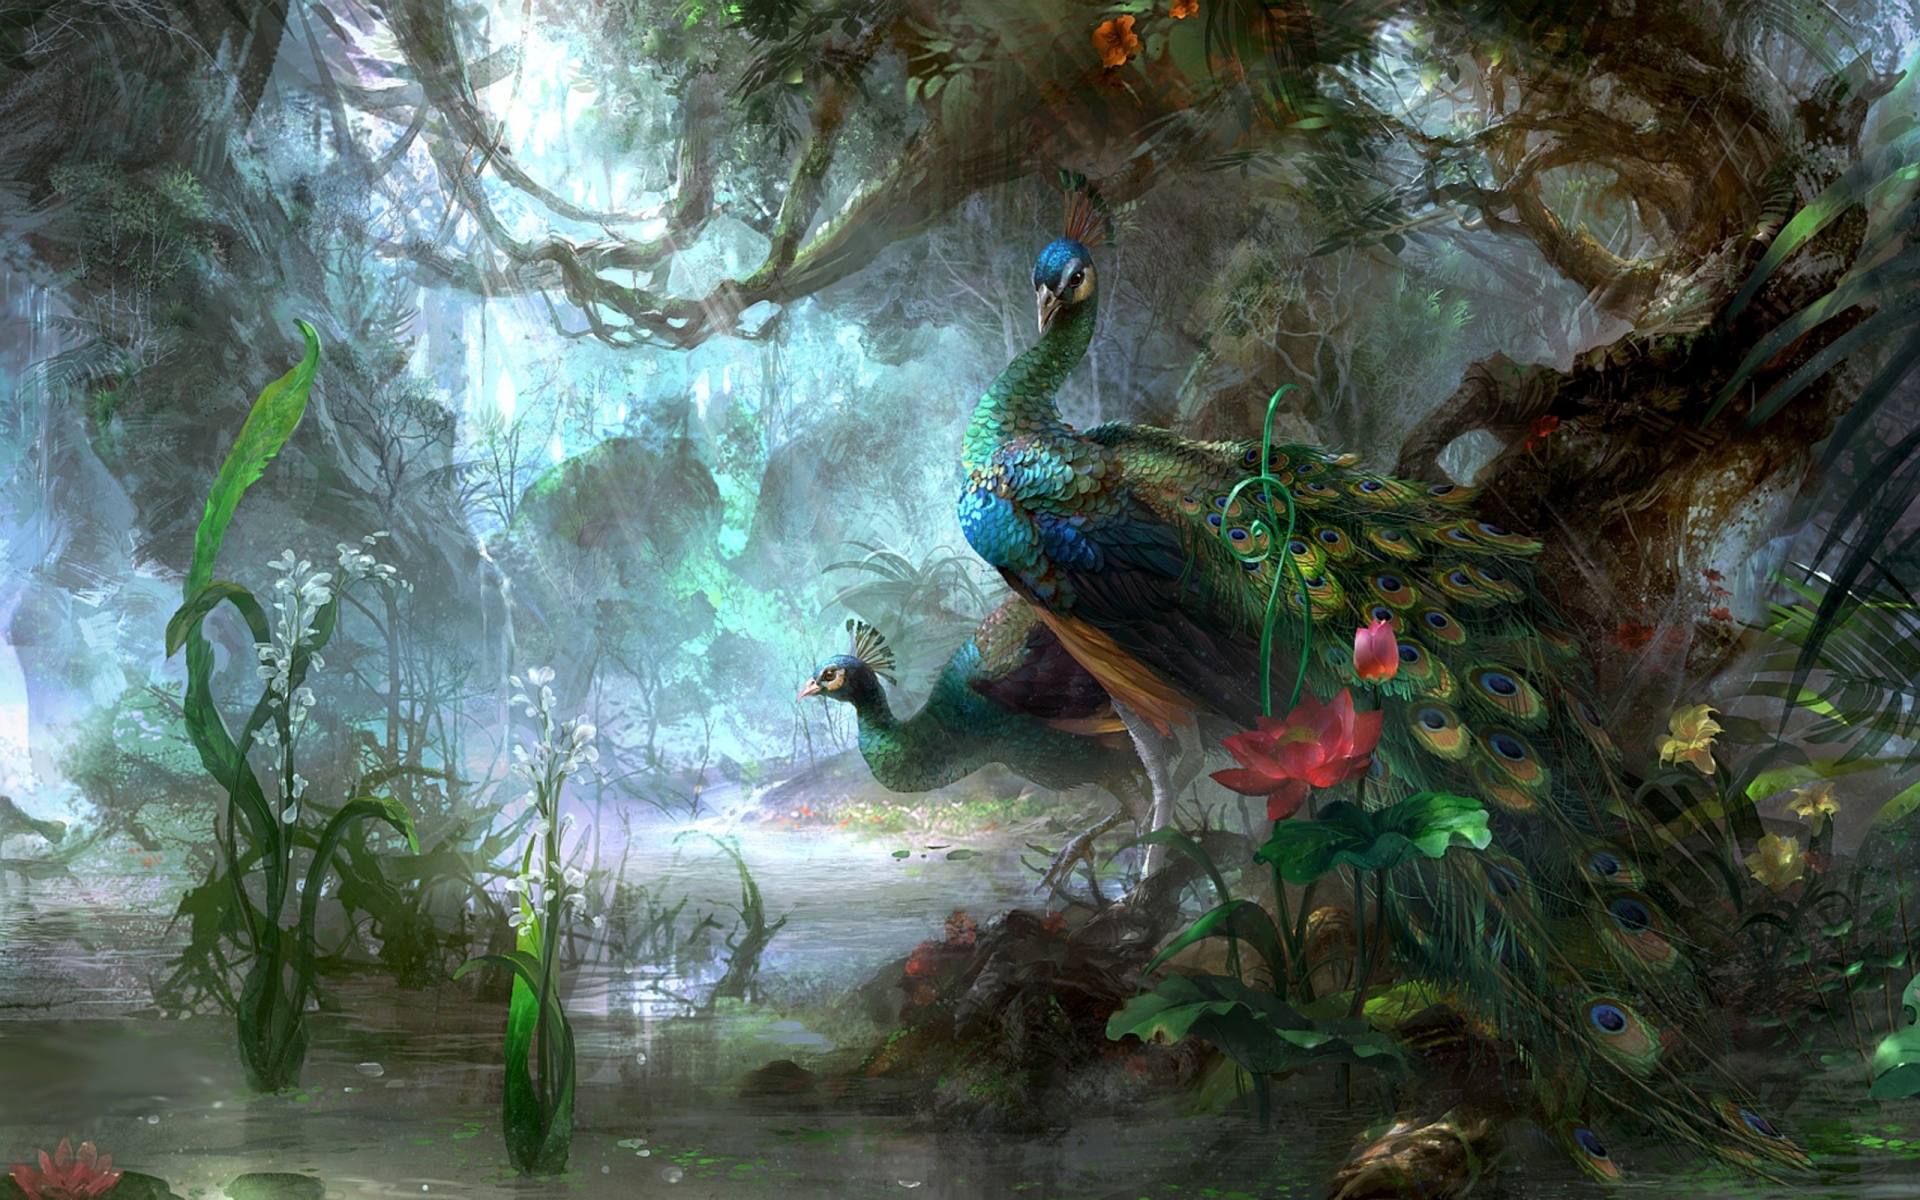 fantasy, Artistic, Paintings, Trees, Forest, Landscapes, Birds, Animals, Magical, Peacock, Jungle, Lake, Pond, Water, Moss, Flowers Wallpaper